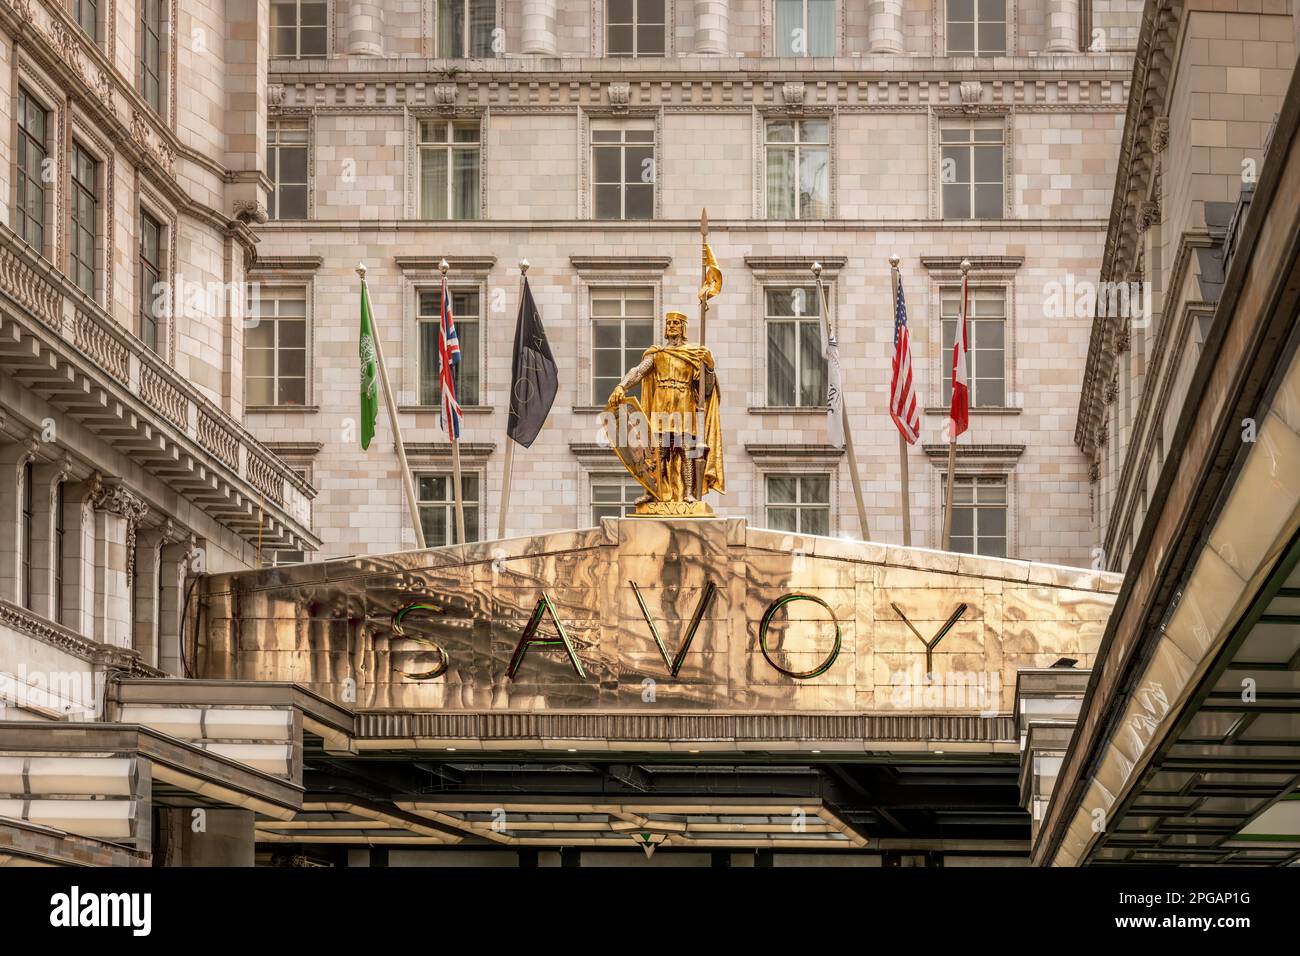 Located on the Strand in the City of Westminster, the luxury Savoy Hotel has an impressive entrance to match it's reputation. The prestigious London h Stock Photo